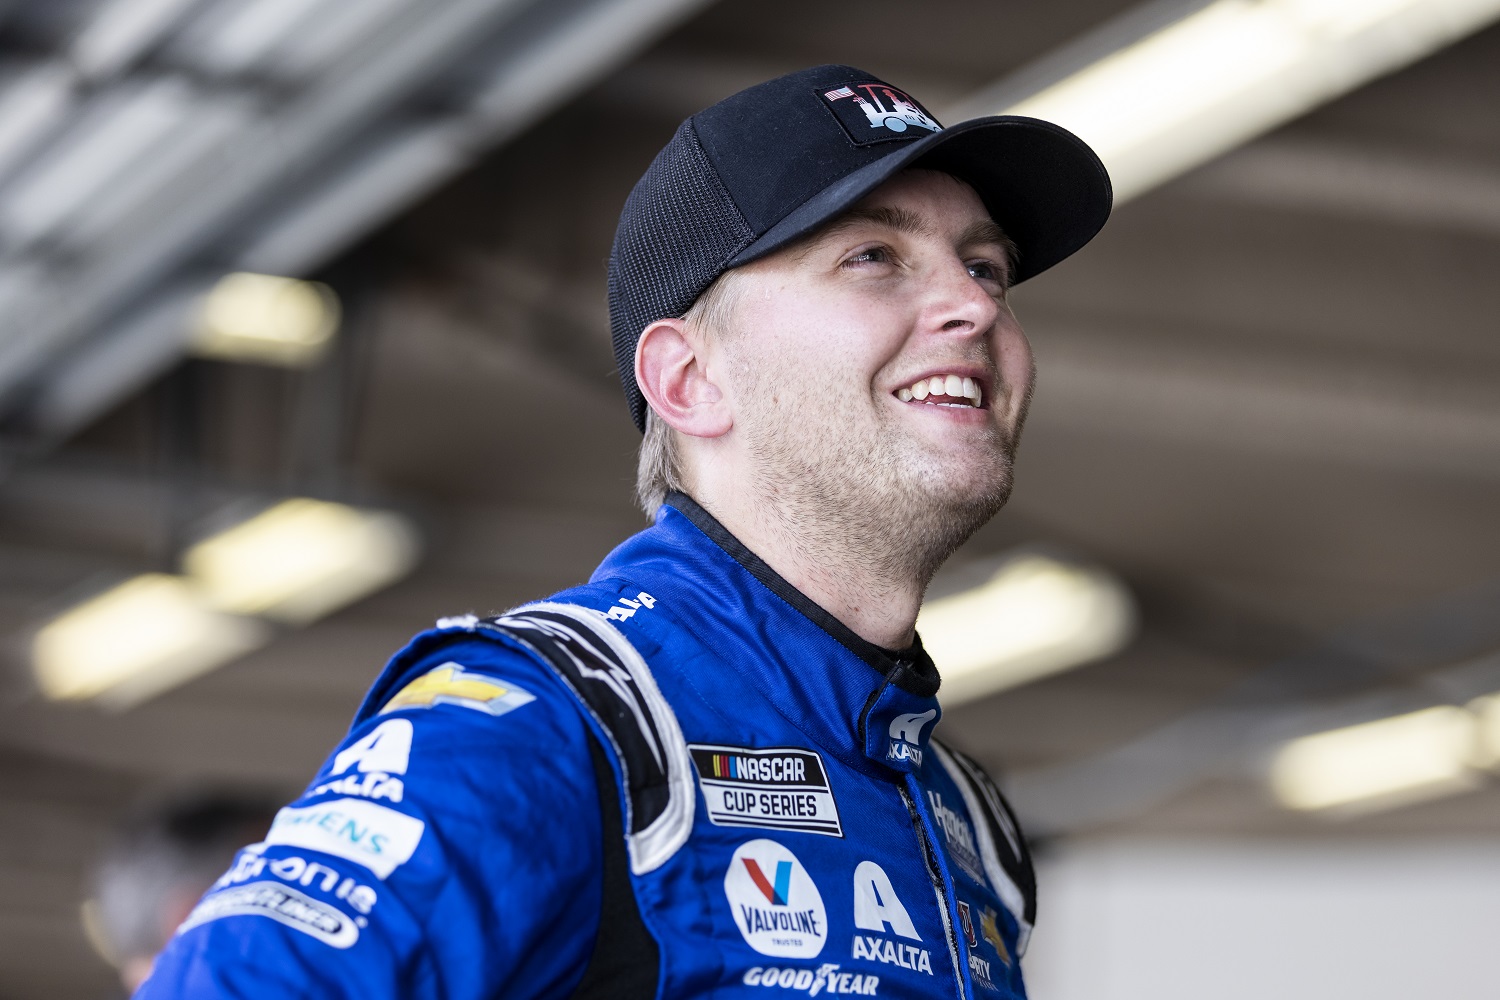 William Byron, driver of the No. 24 Chevy, looks on from the garage during the NASCAR Cup Series test at Daytona International Speedway on Sept. 7, 2021.